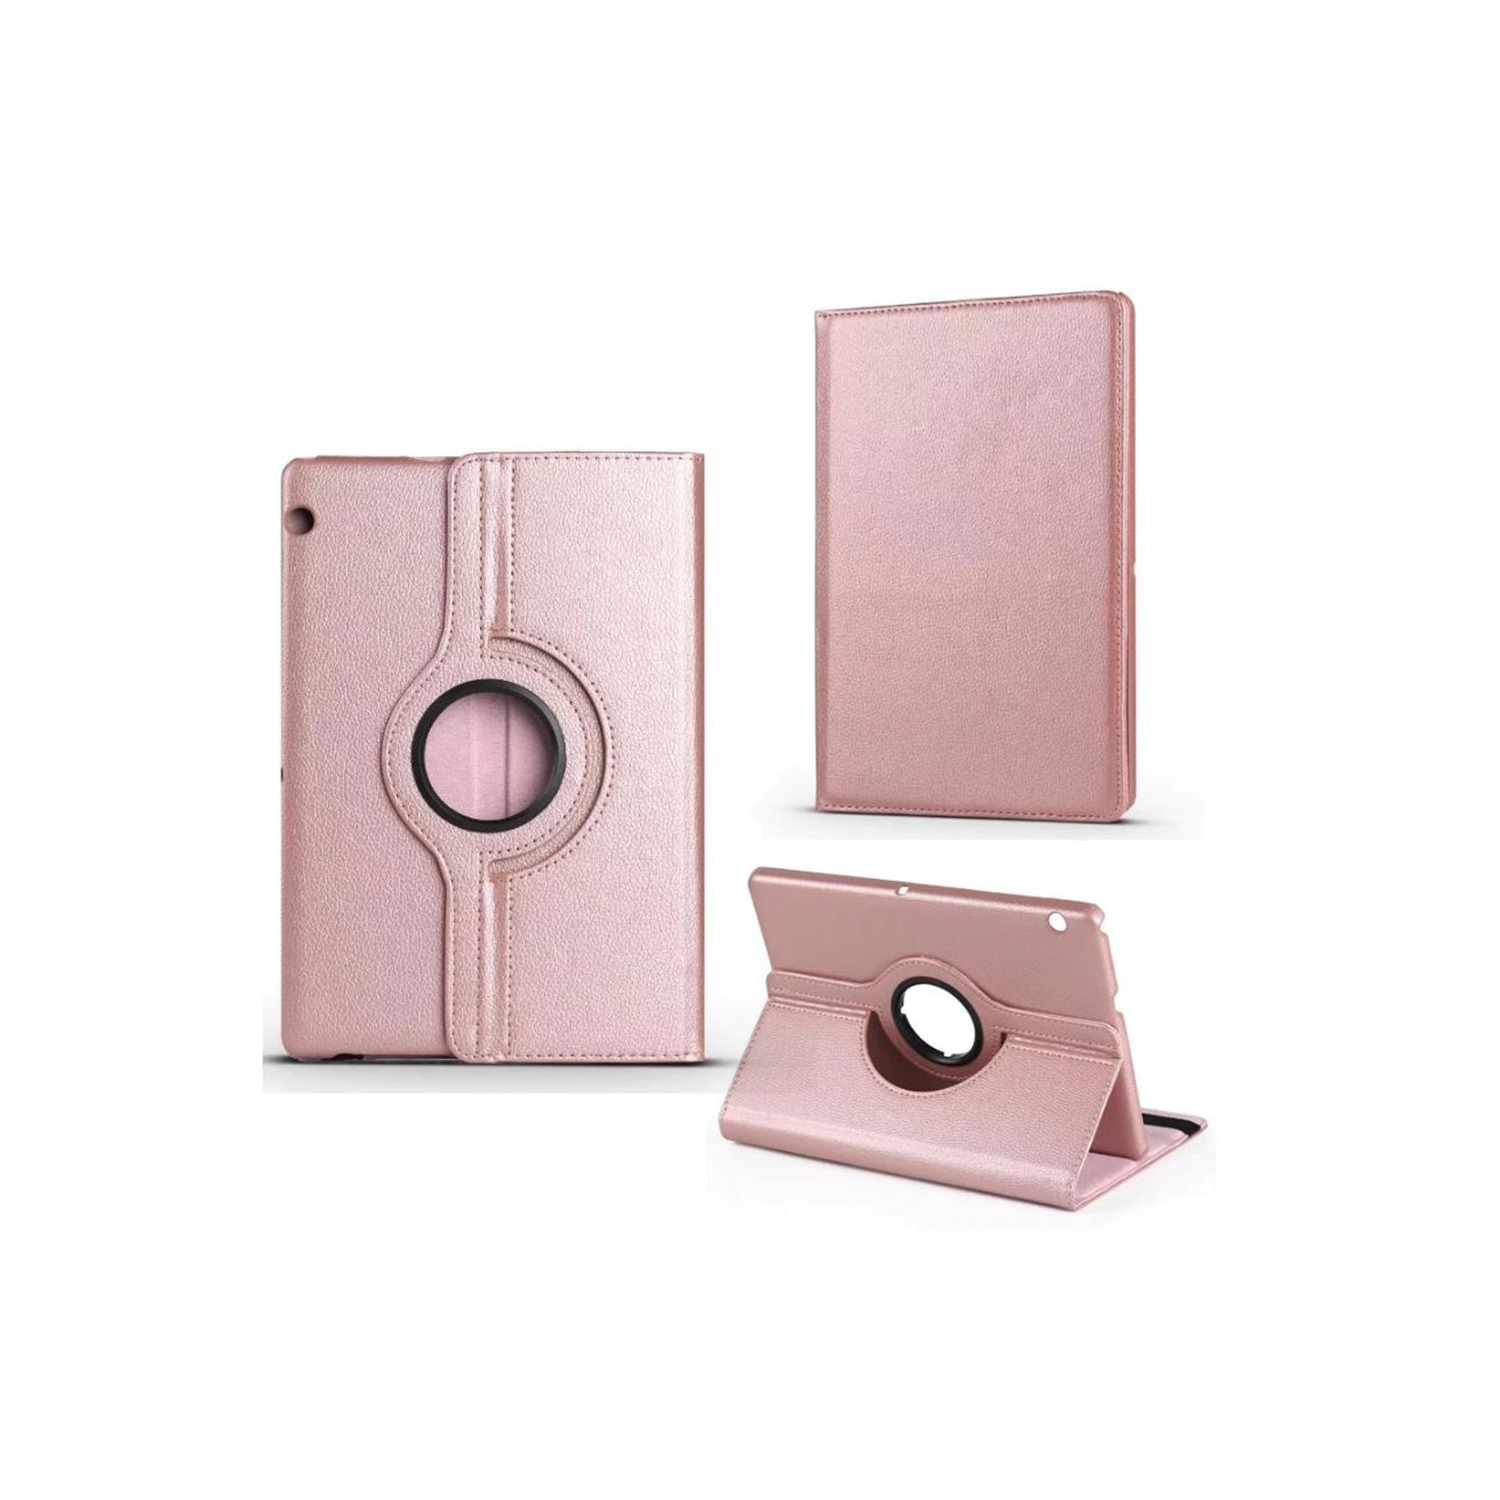 【CSmart】 360 Rotating PU Leather Stand Case Smart Cover for Huawei Mediapad T5 10 10.1", Rose Gold